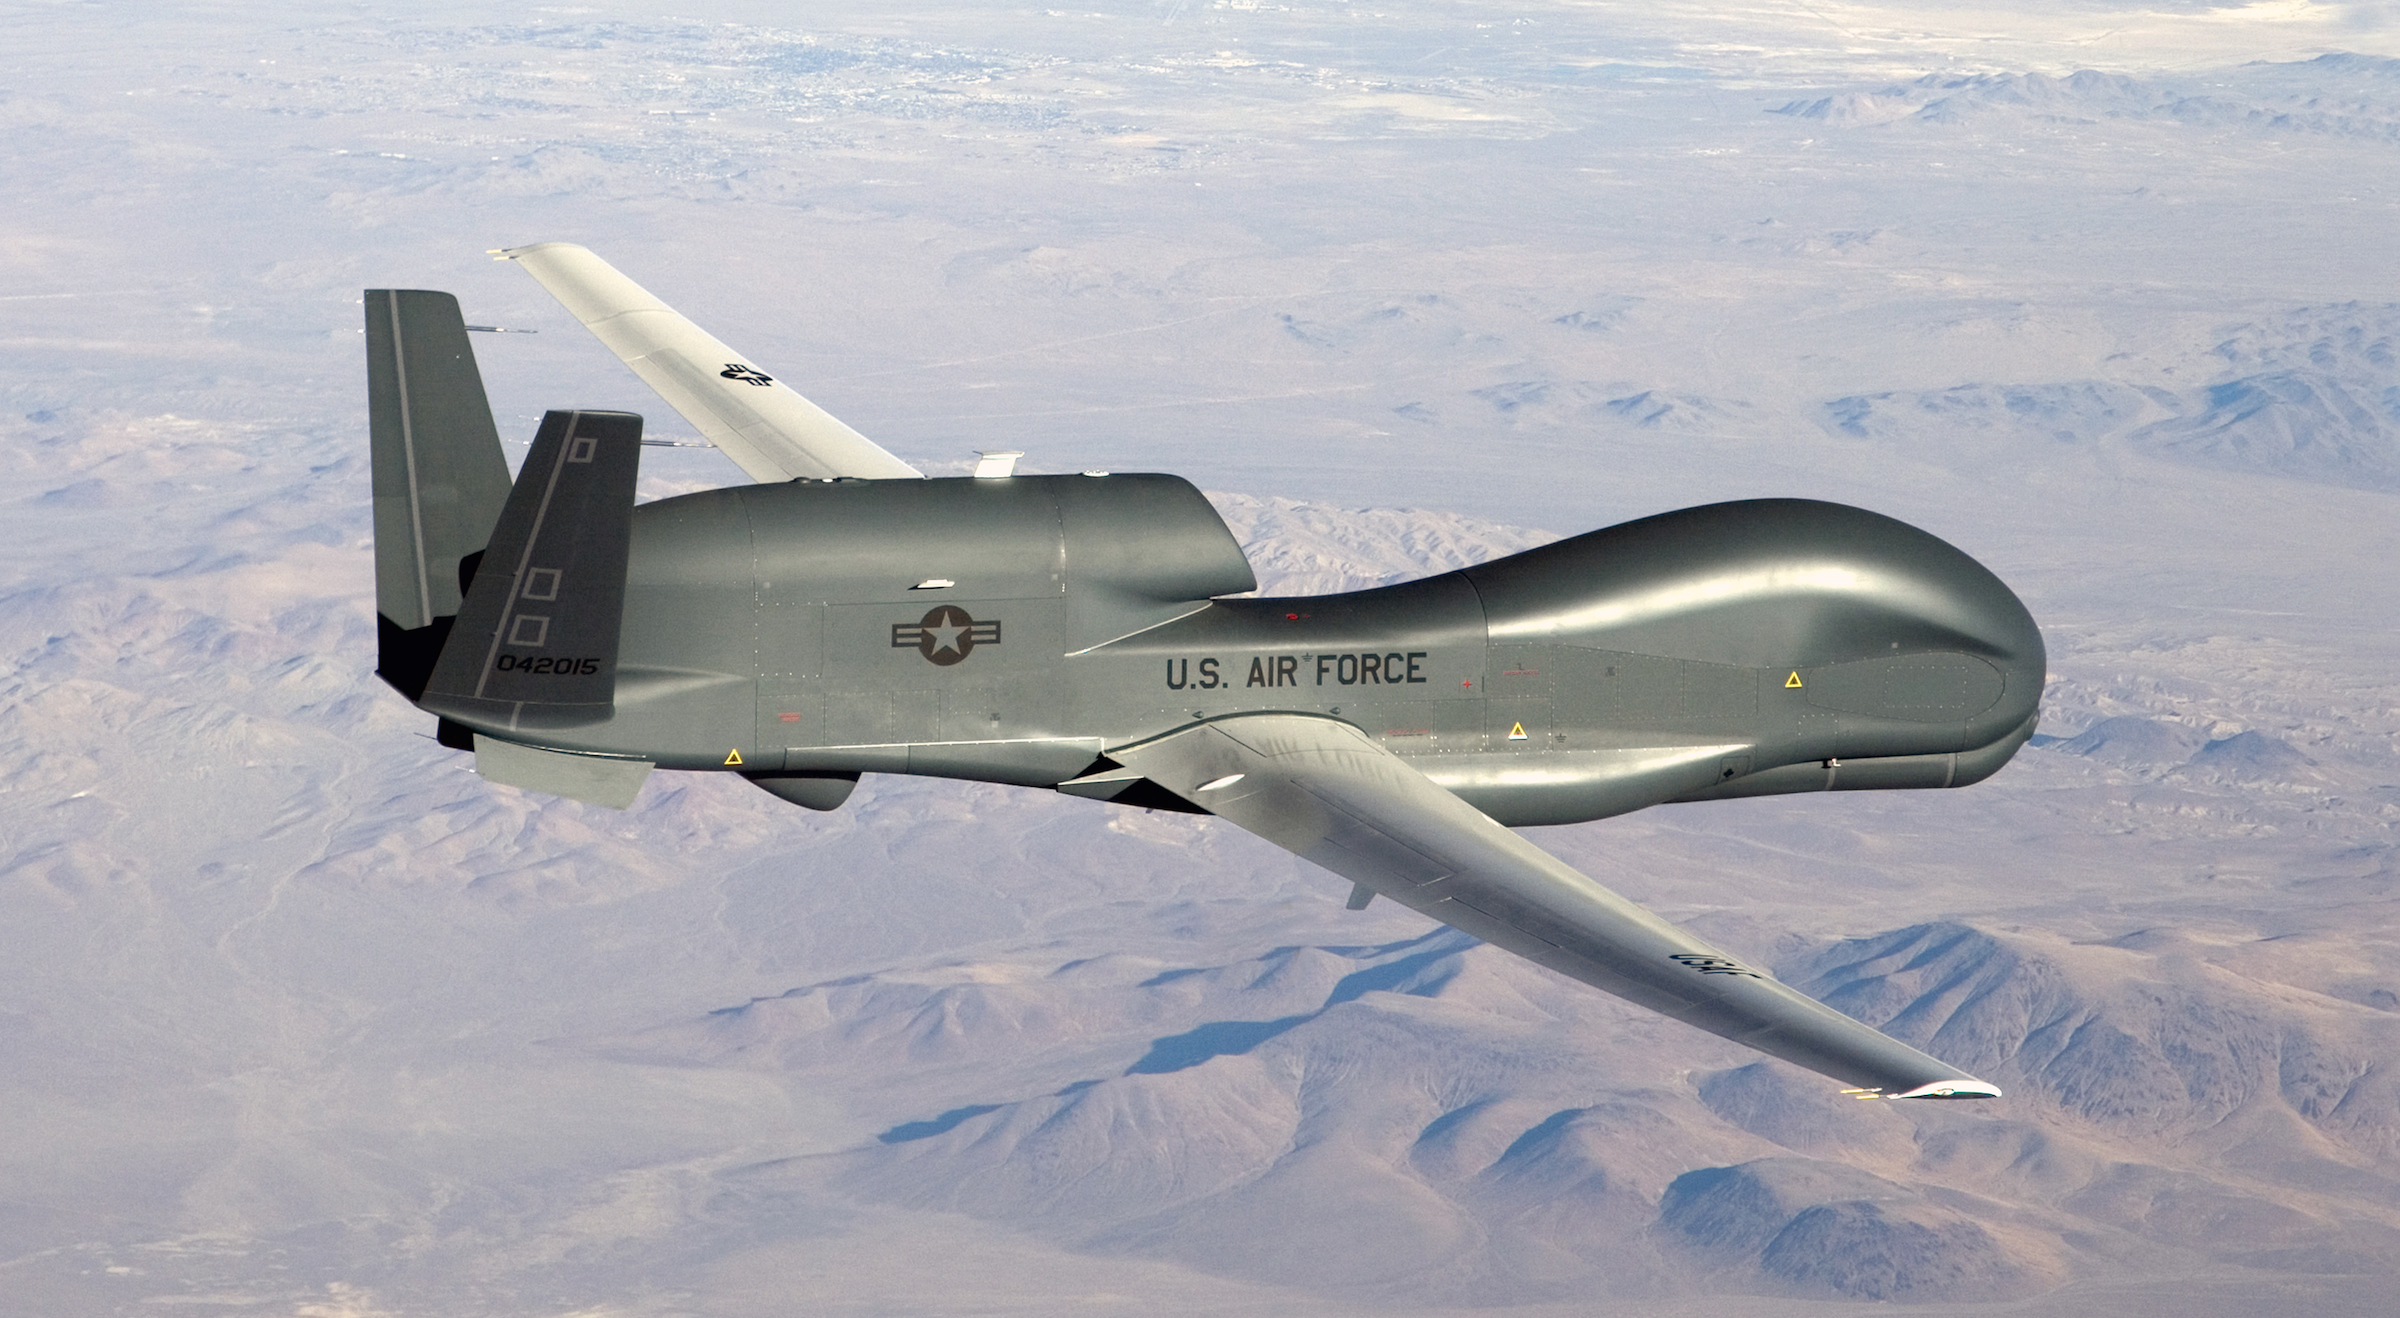 Your liberty will not survive combat drones